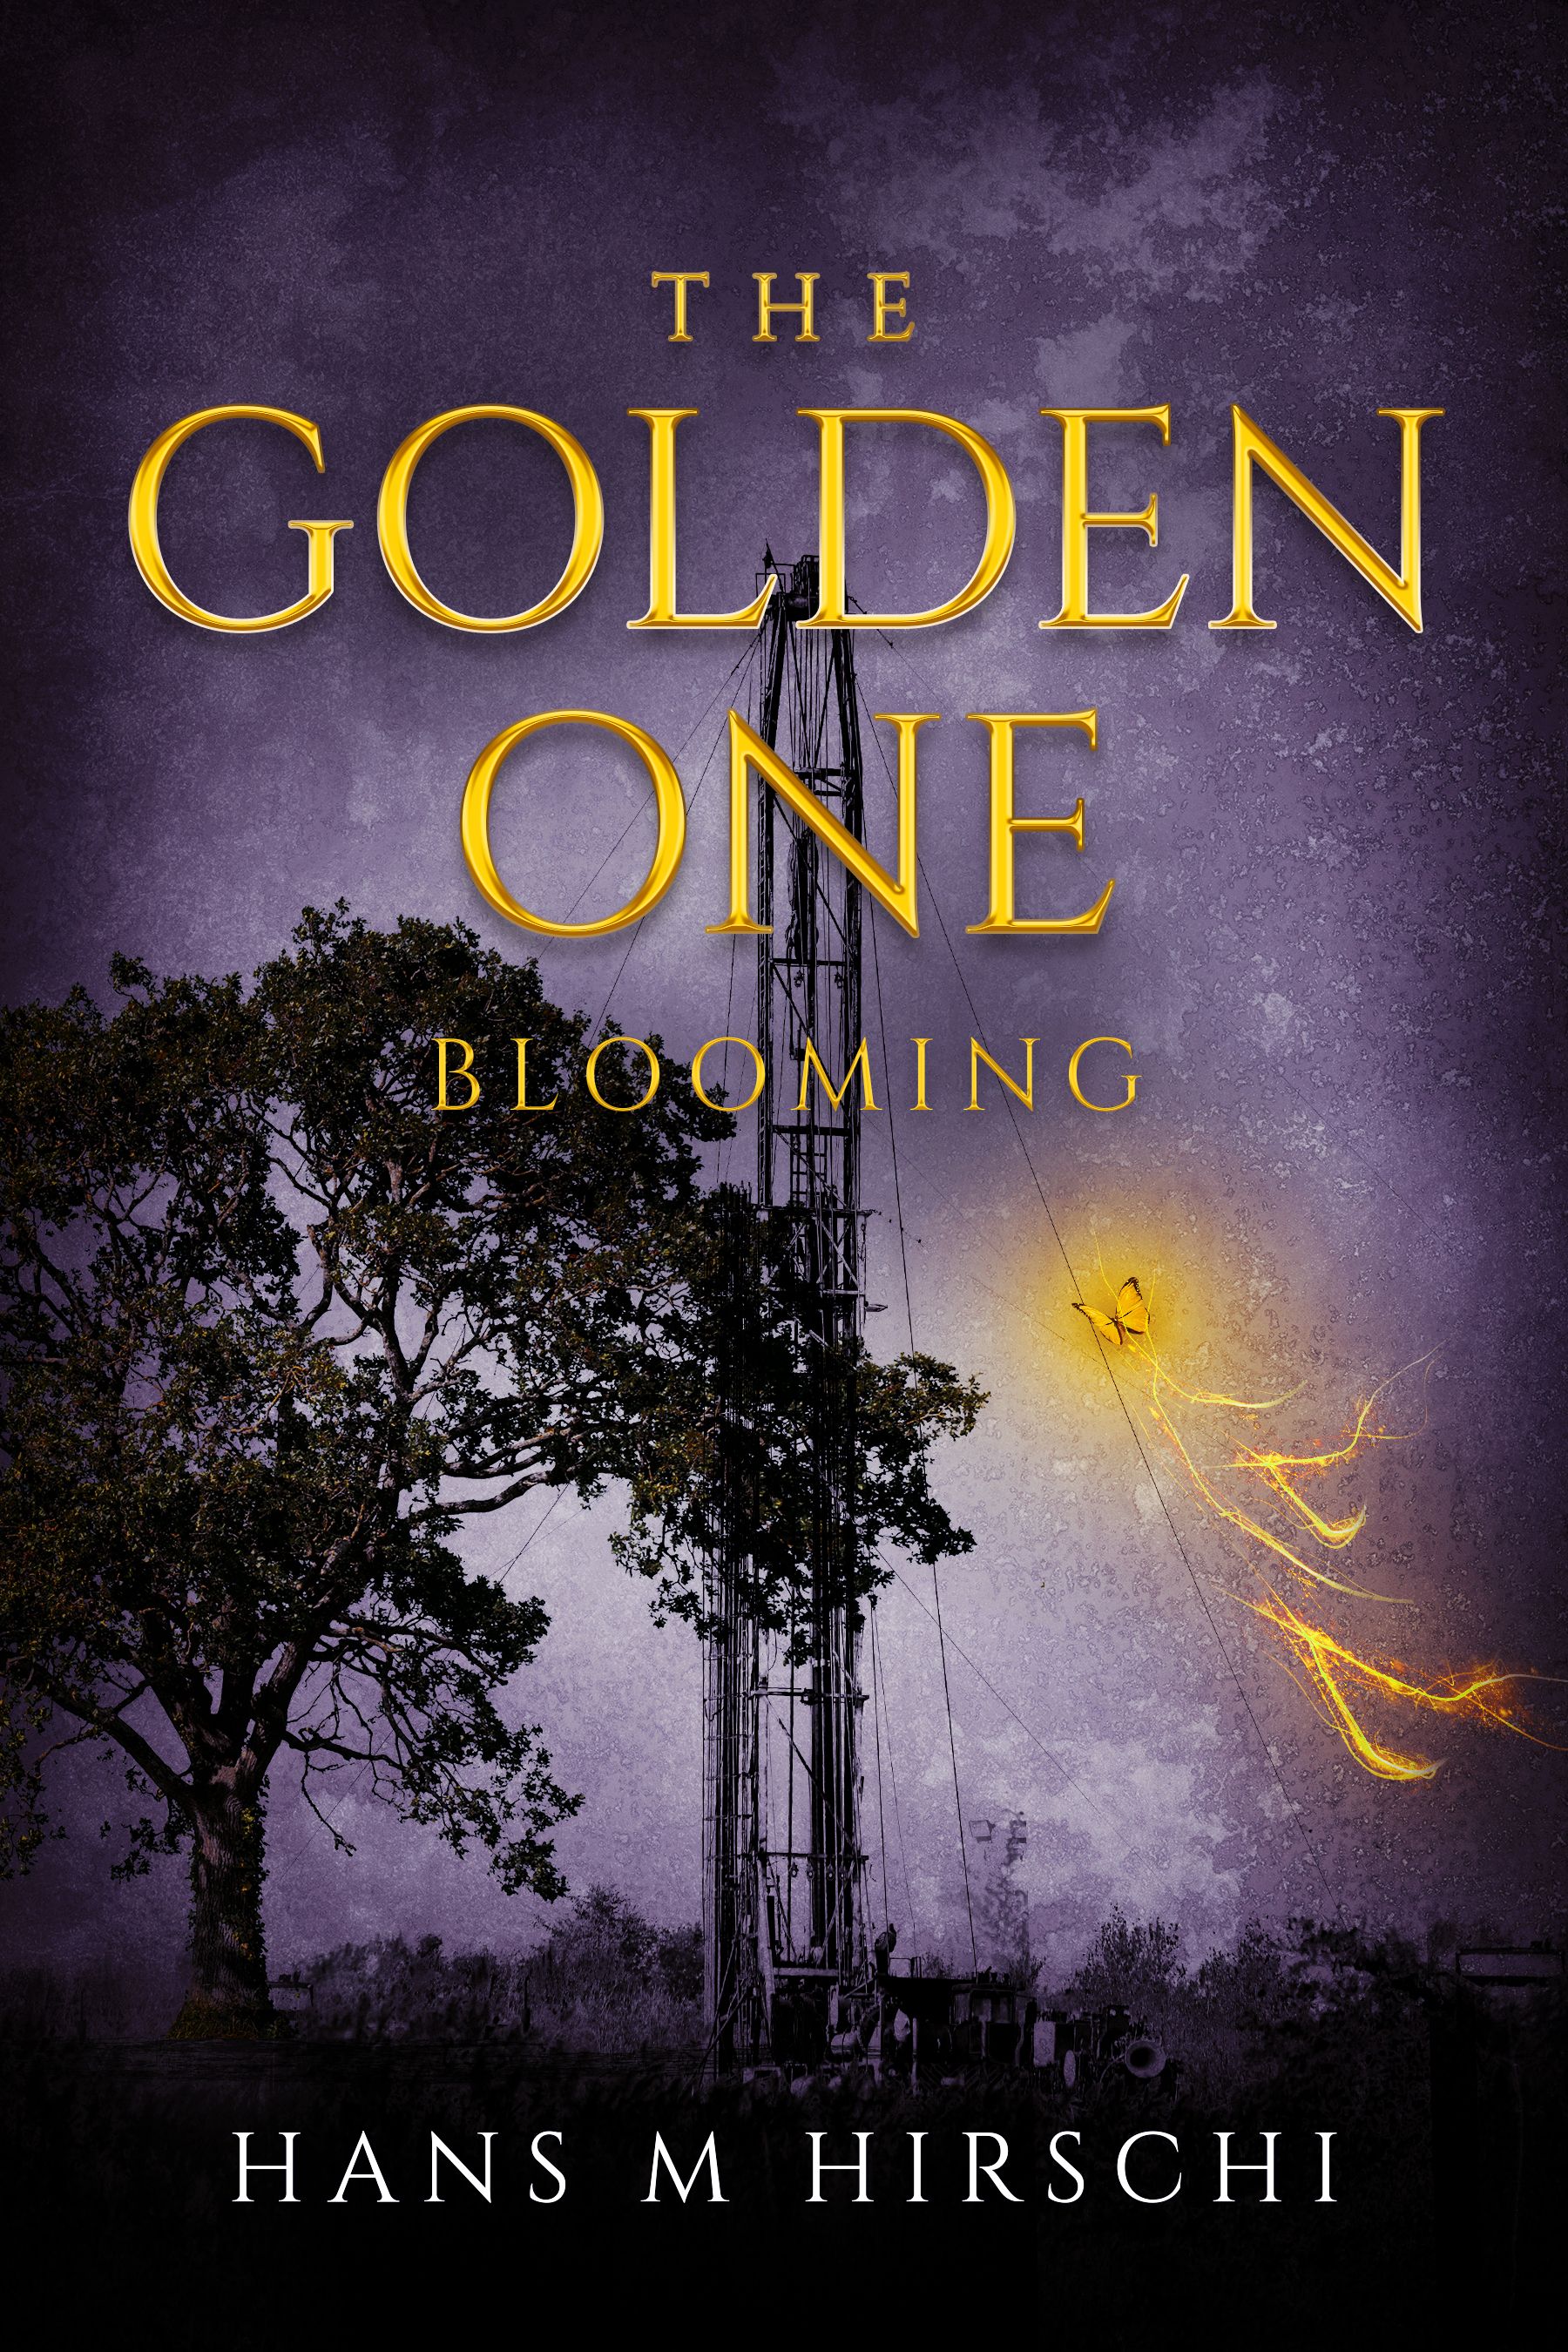 The Golden One–Blooming, eBook by Hans M Hirschi